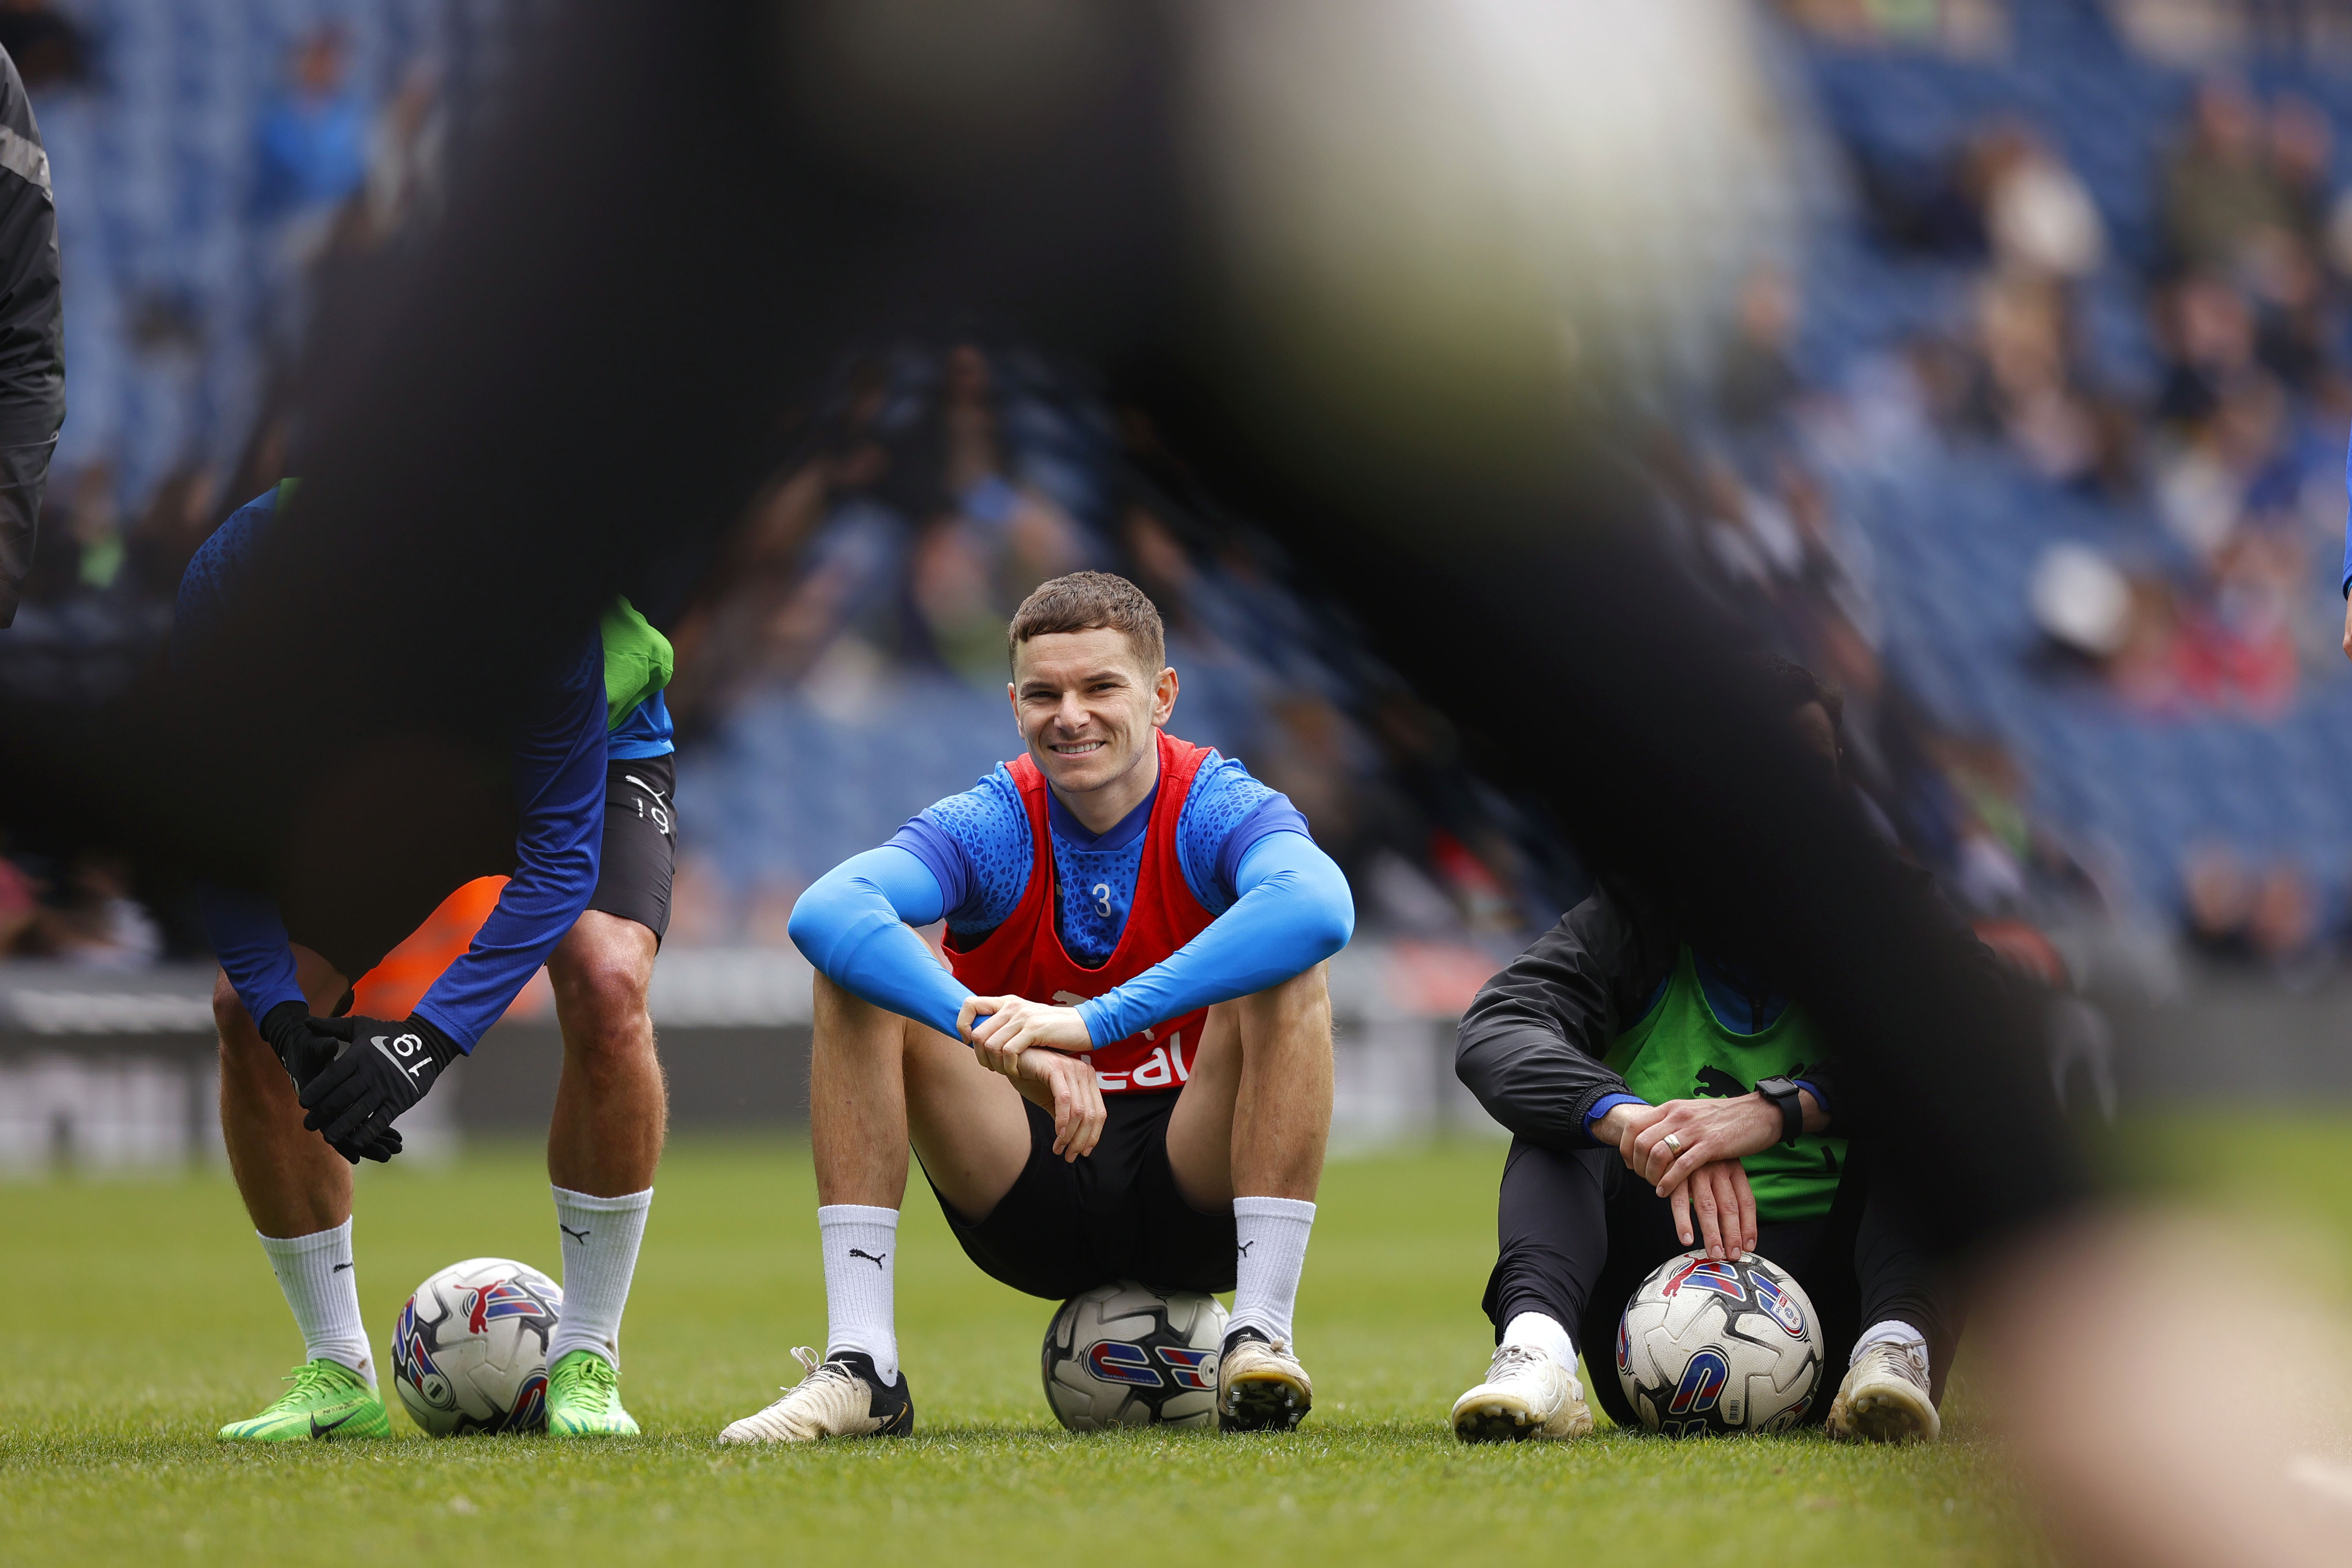 Conor Townsend sat on a ball smiling during a training session at The Hawthorns